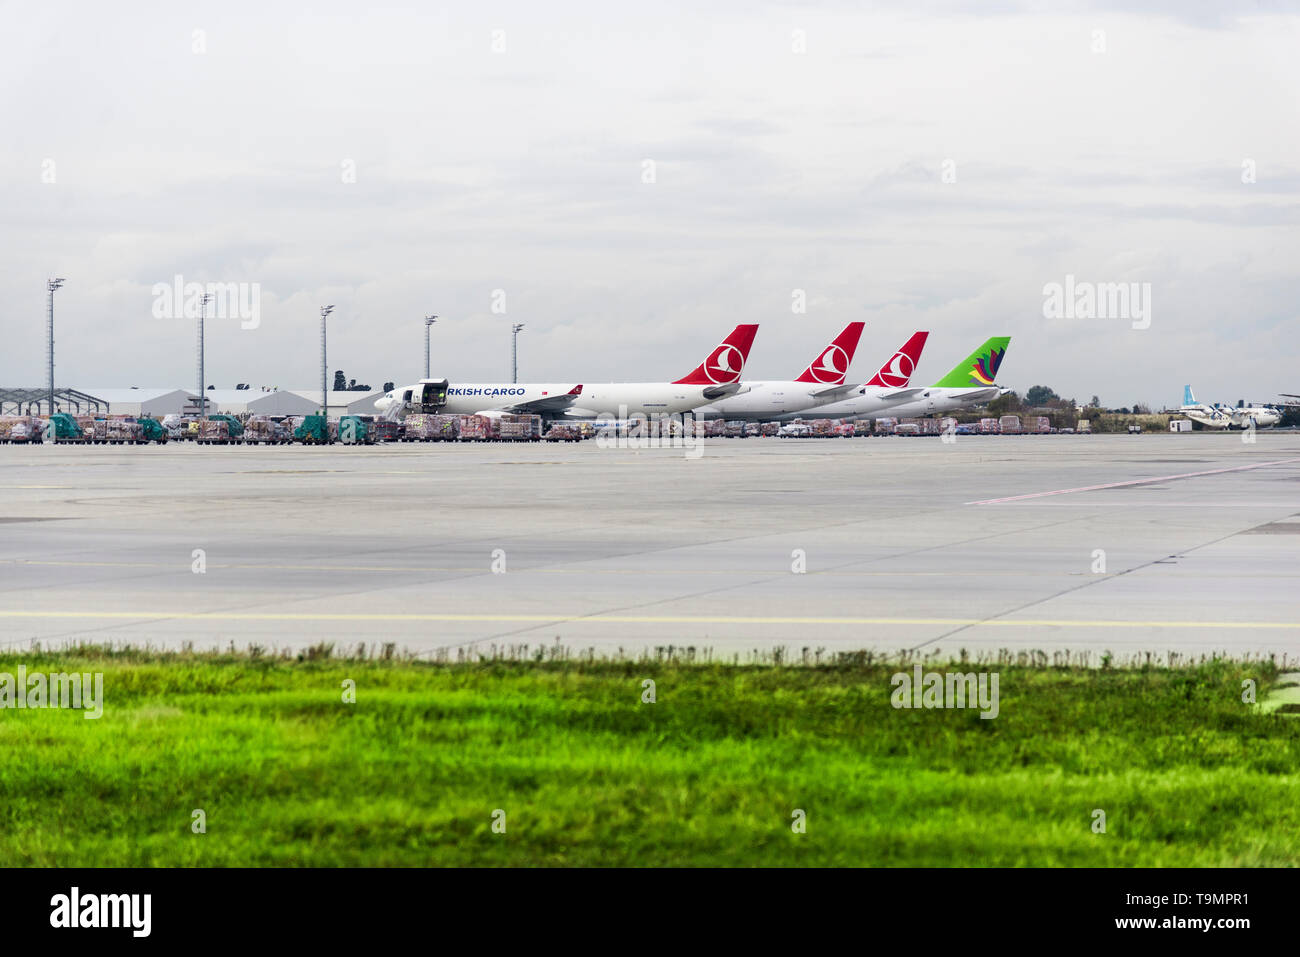 Izmir, Turkey - November 17, 2018. Istanbul airport which is out of service now. With three Turkish airlines cargo planes parked. Stock Photo